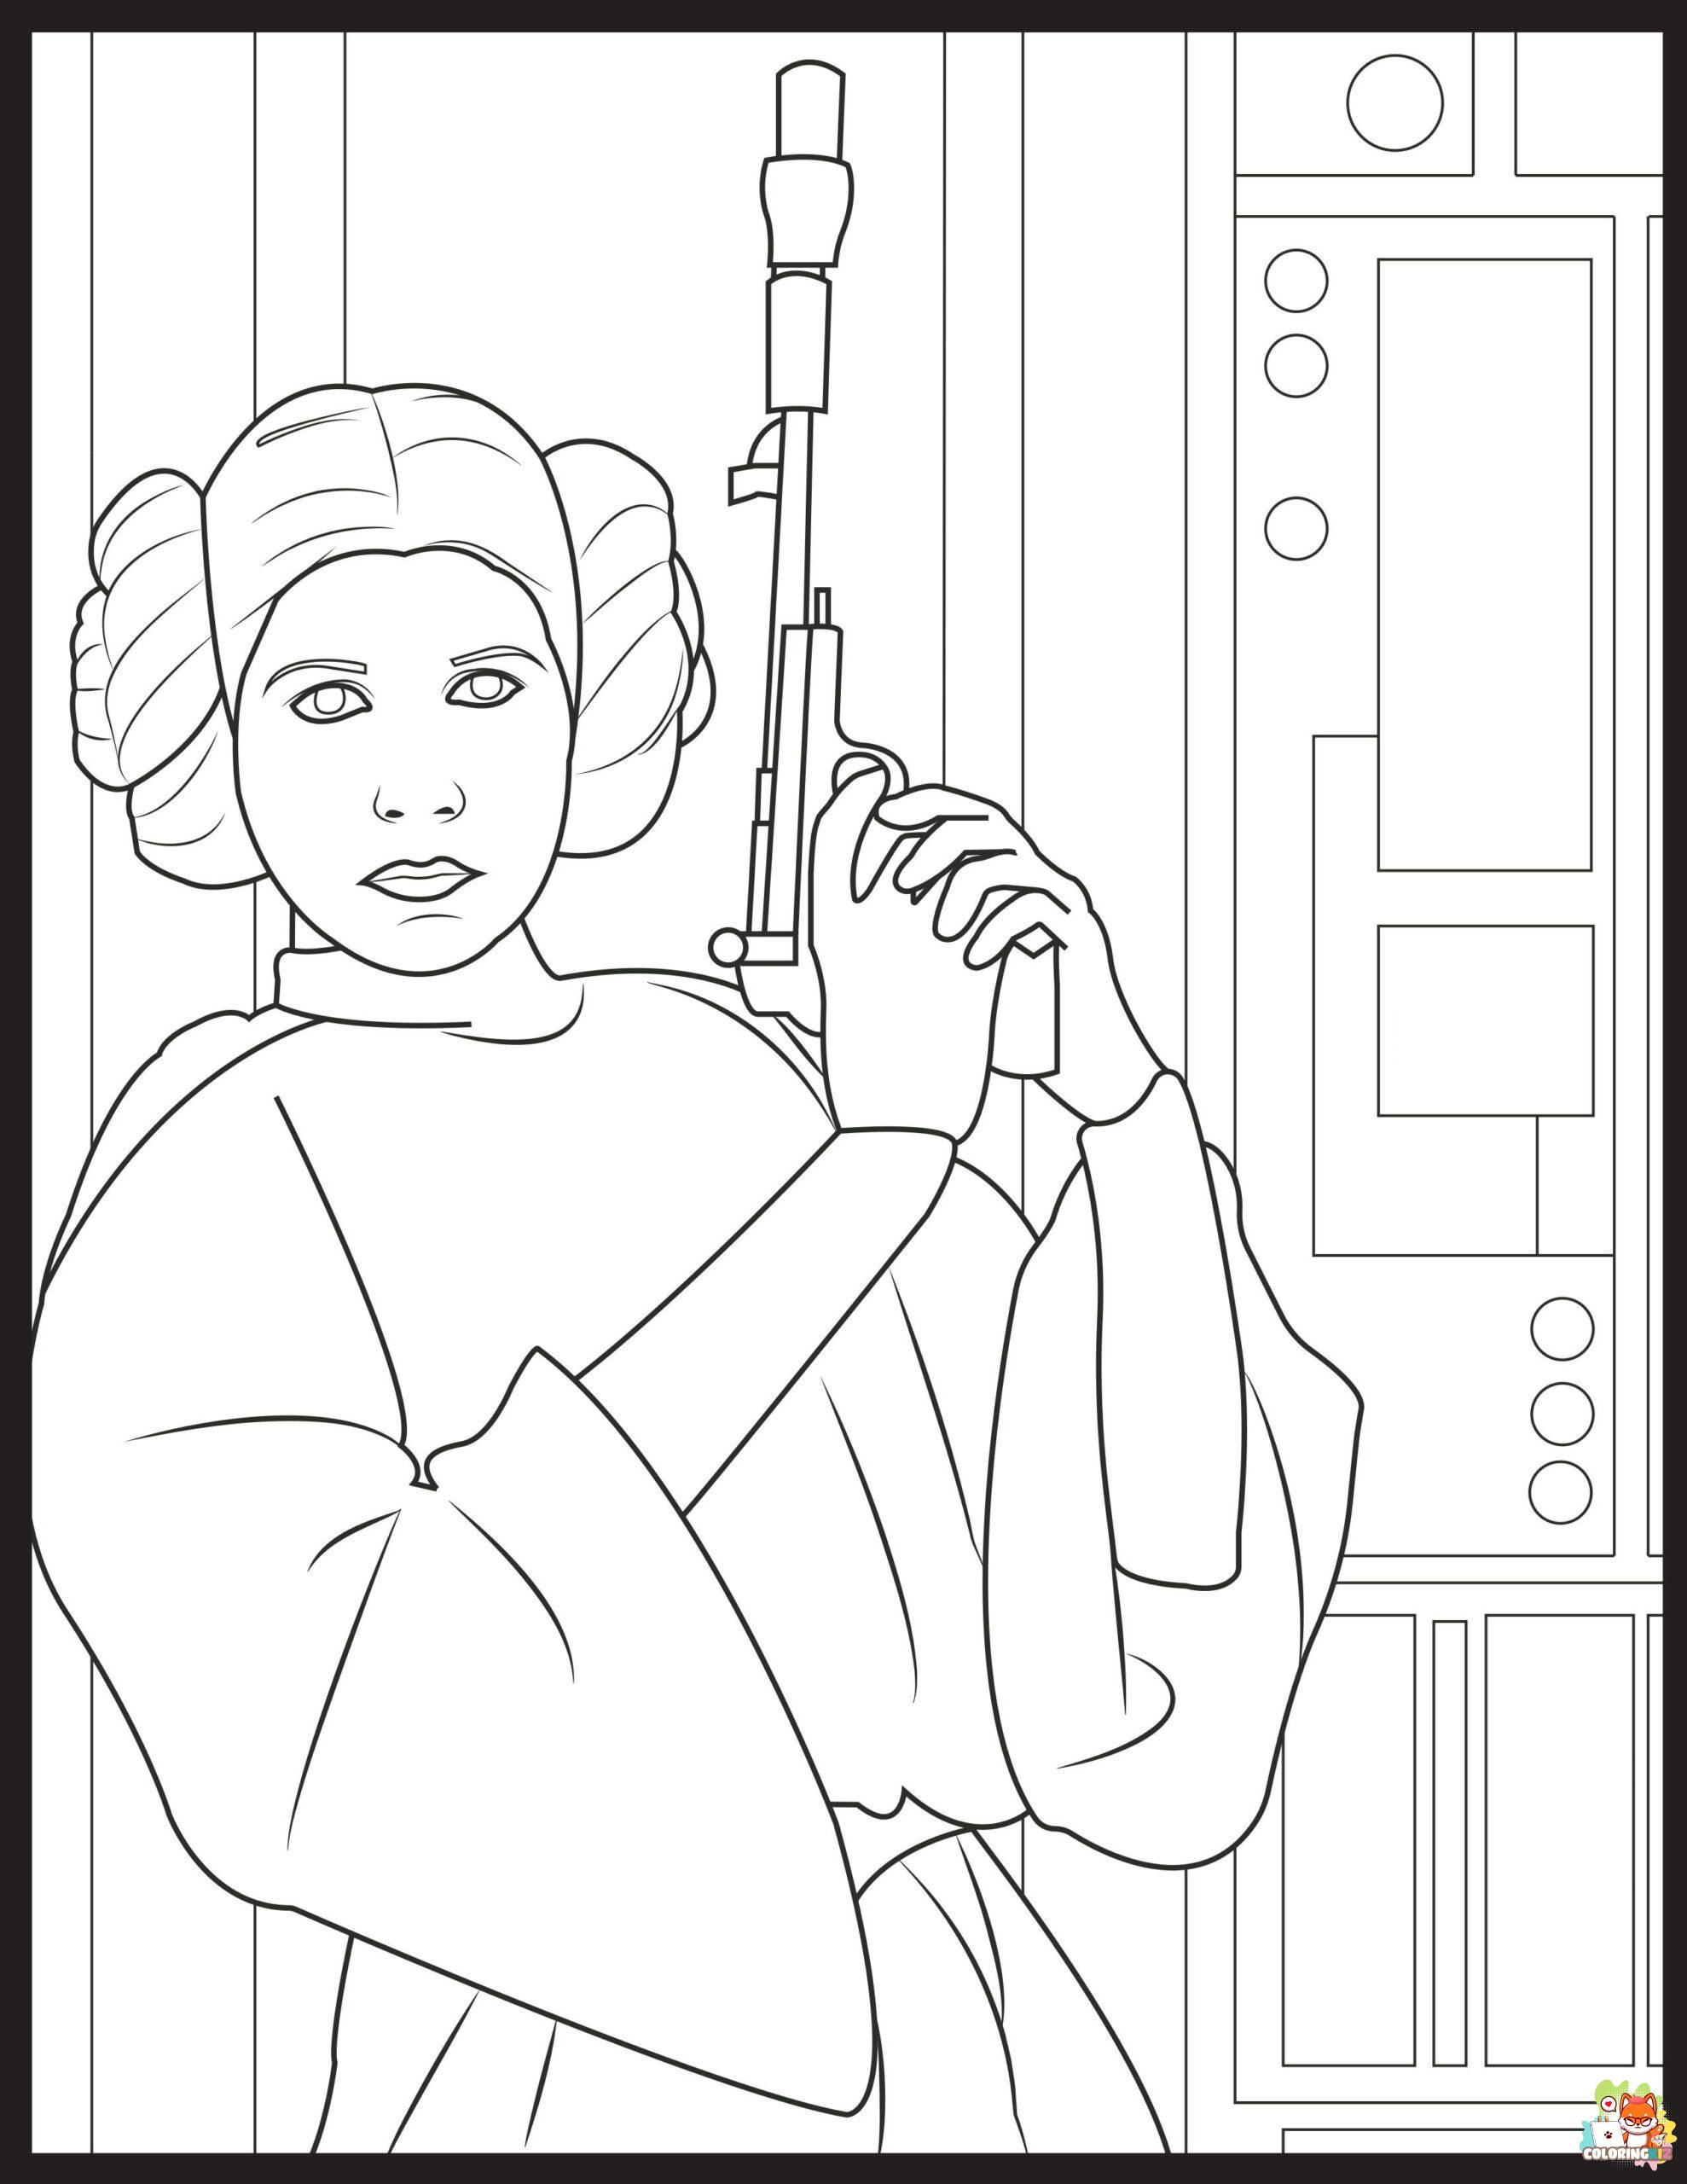 printable star wars coloring pages